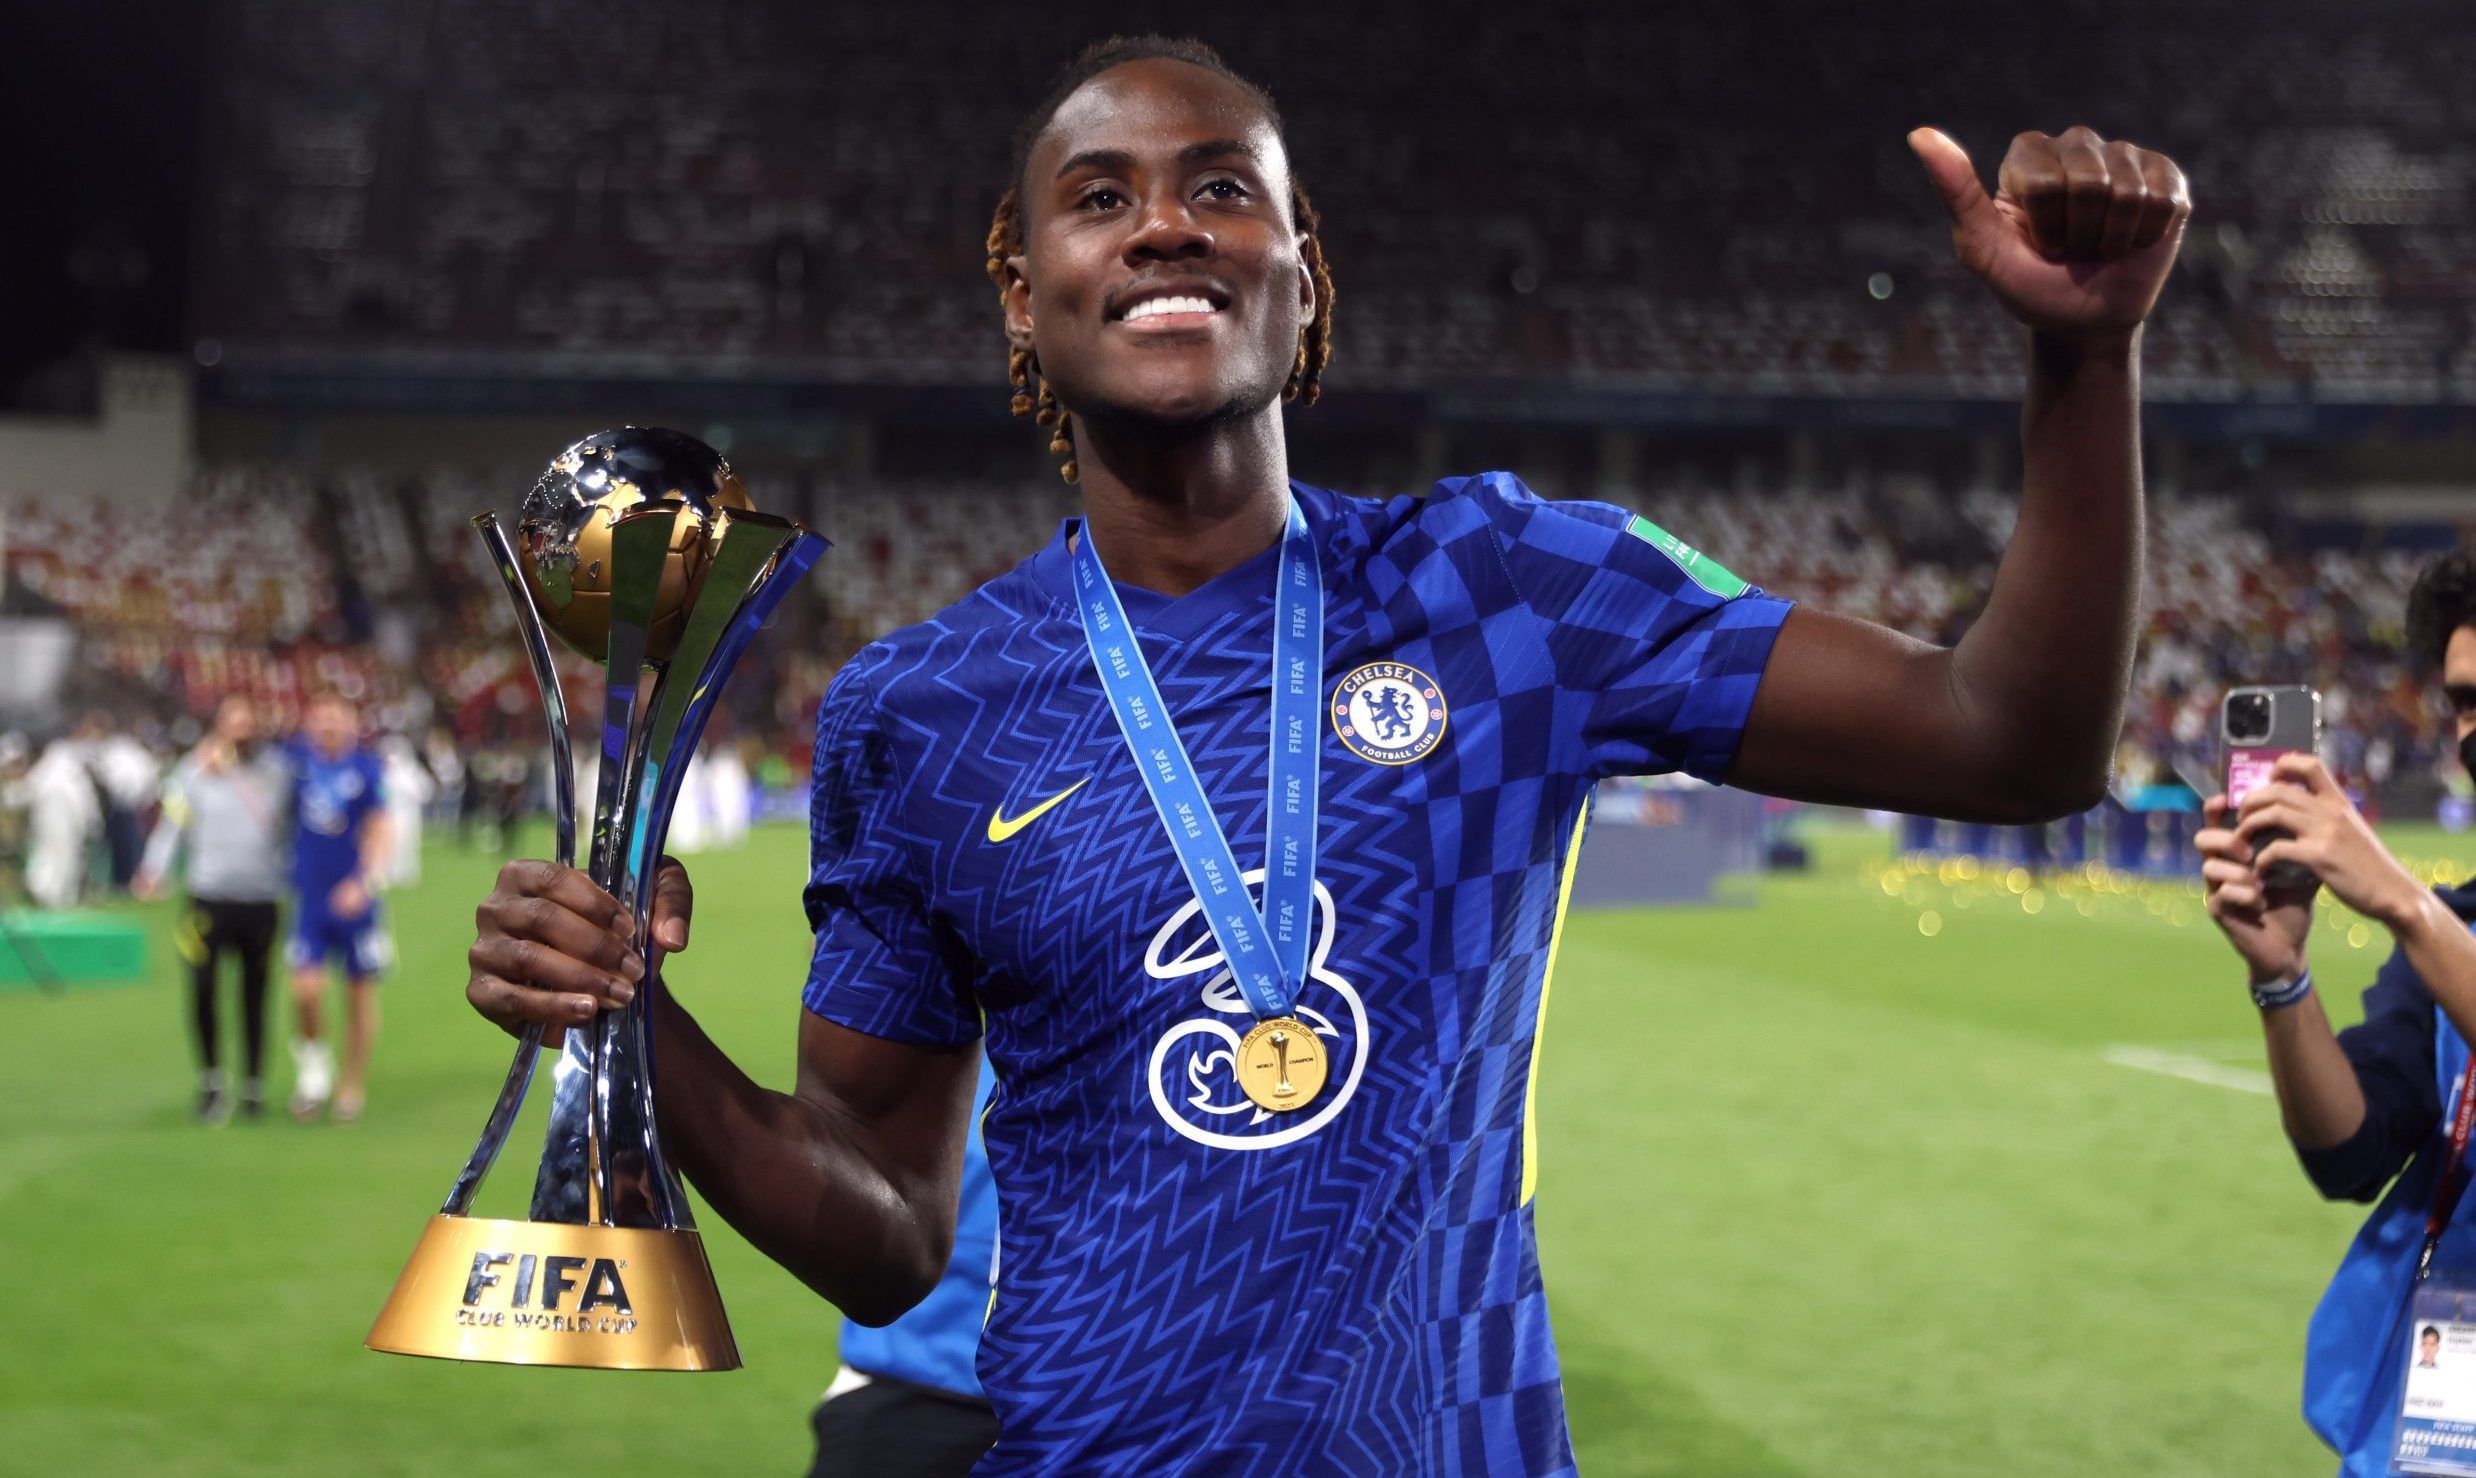 Chelsea's Trevoh Chalobah celebrates with the trophy after winning the Club World Cup